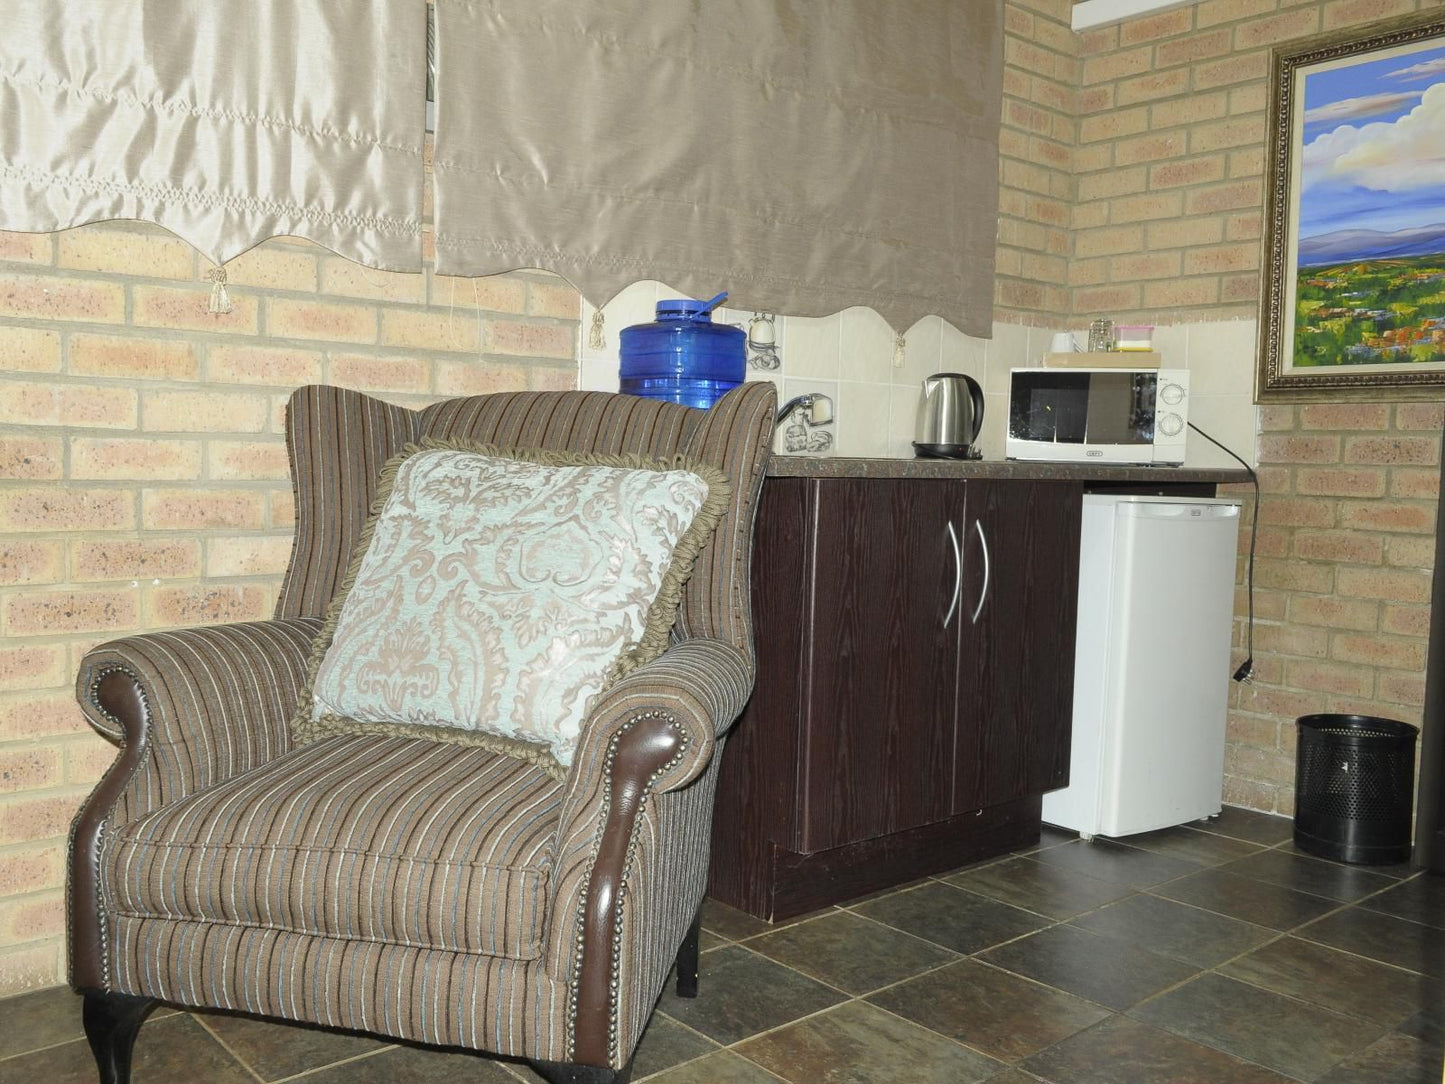 Home Guest House Protea Park Rustenburg North West Province South Africa 